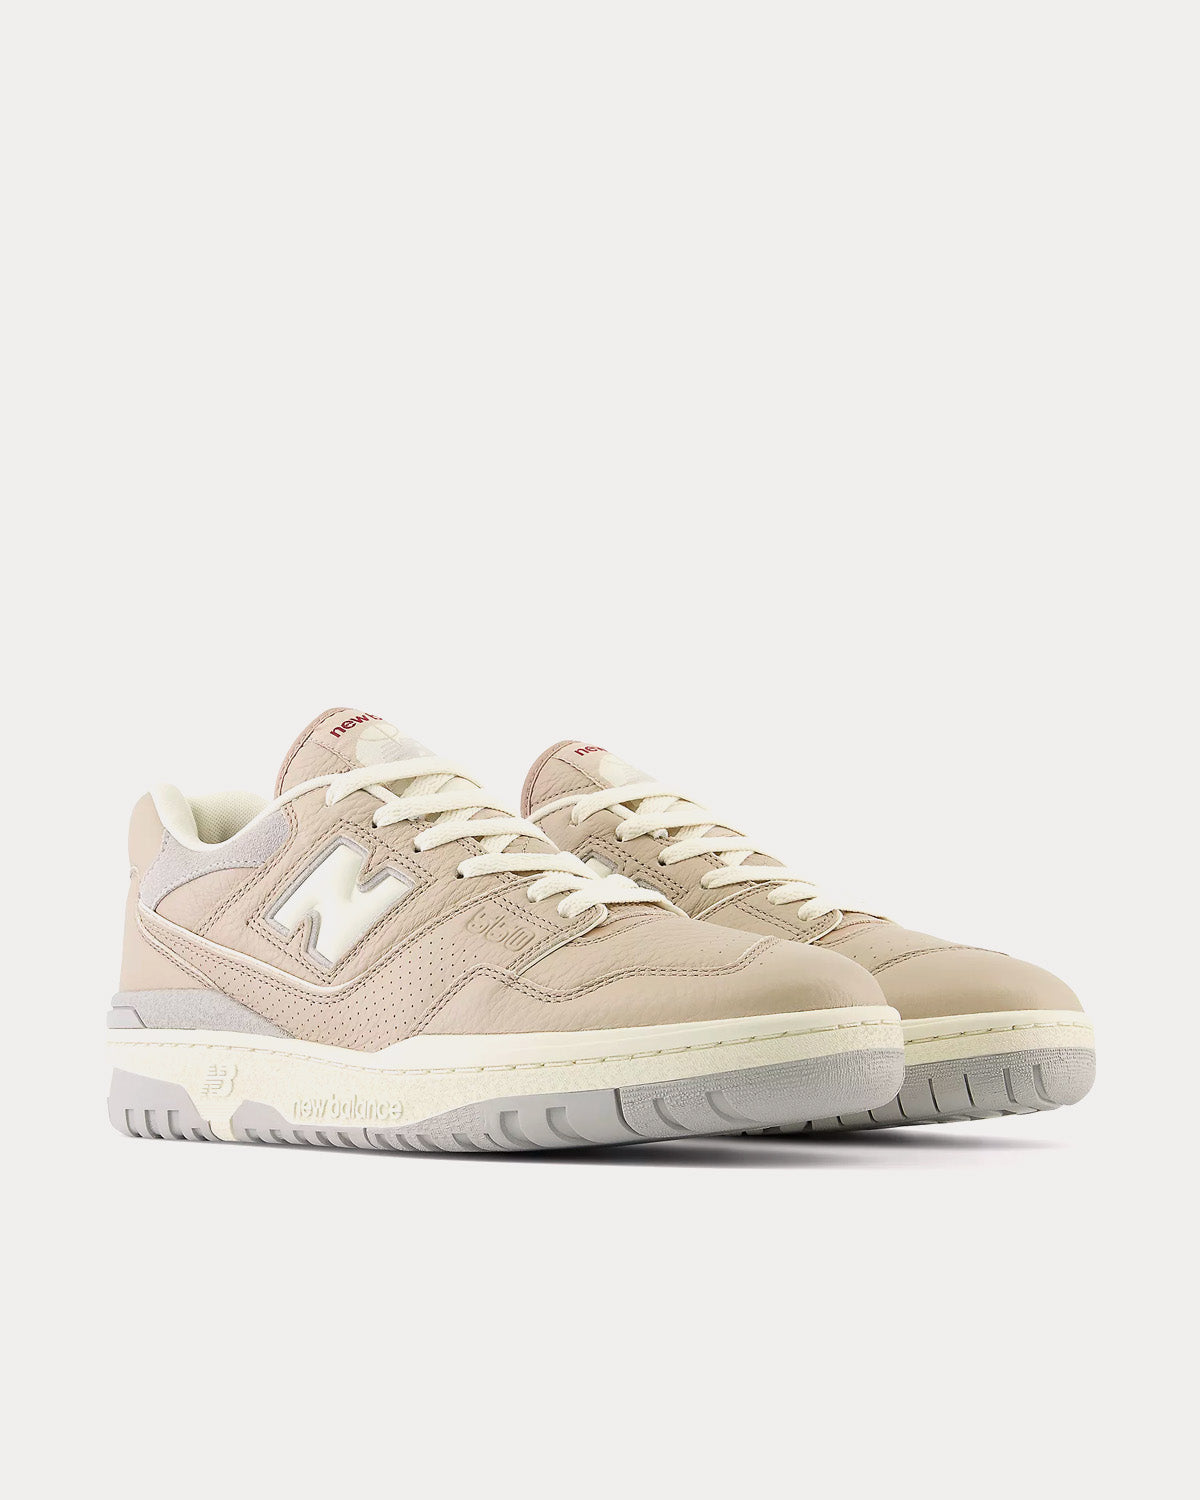 New Balance - BB550 Driftwood with Turtledove & Concrete Low Top Sneakers